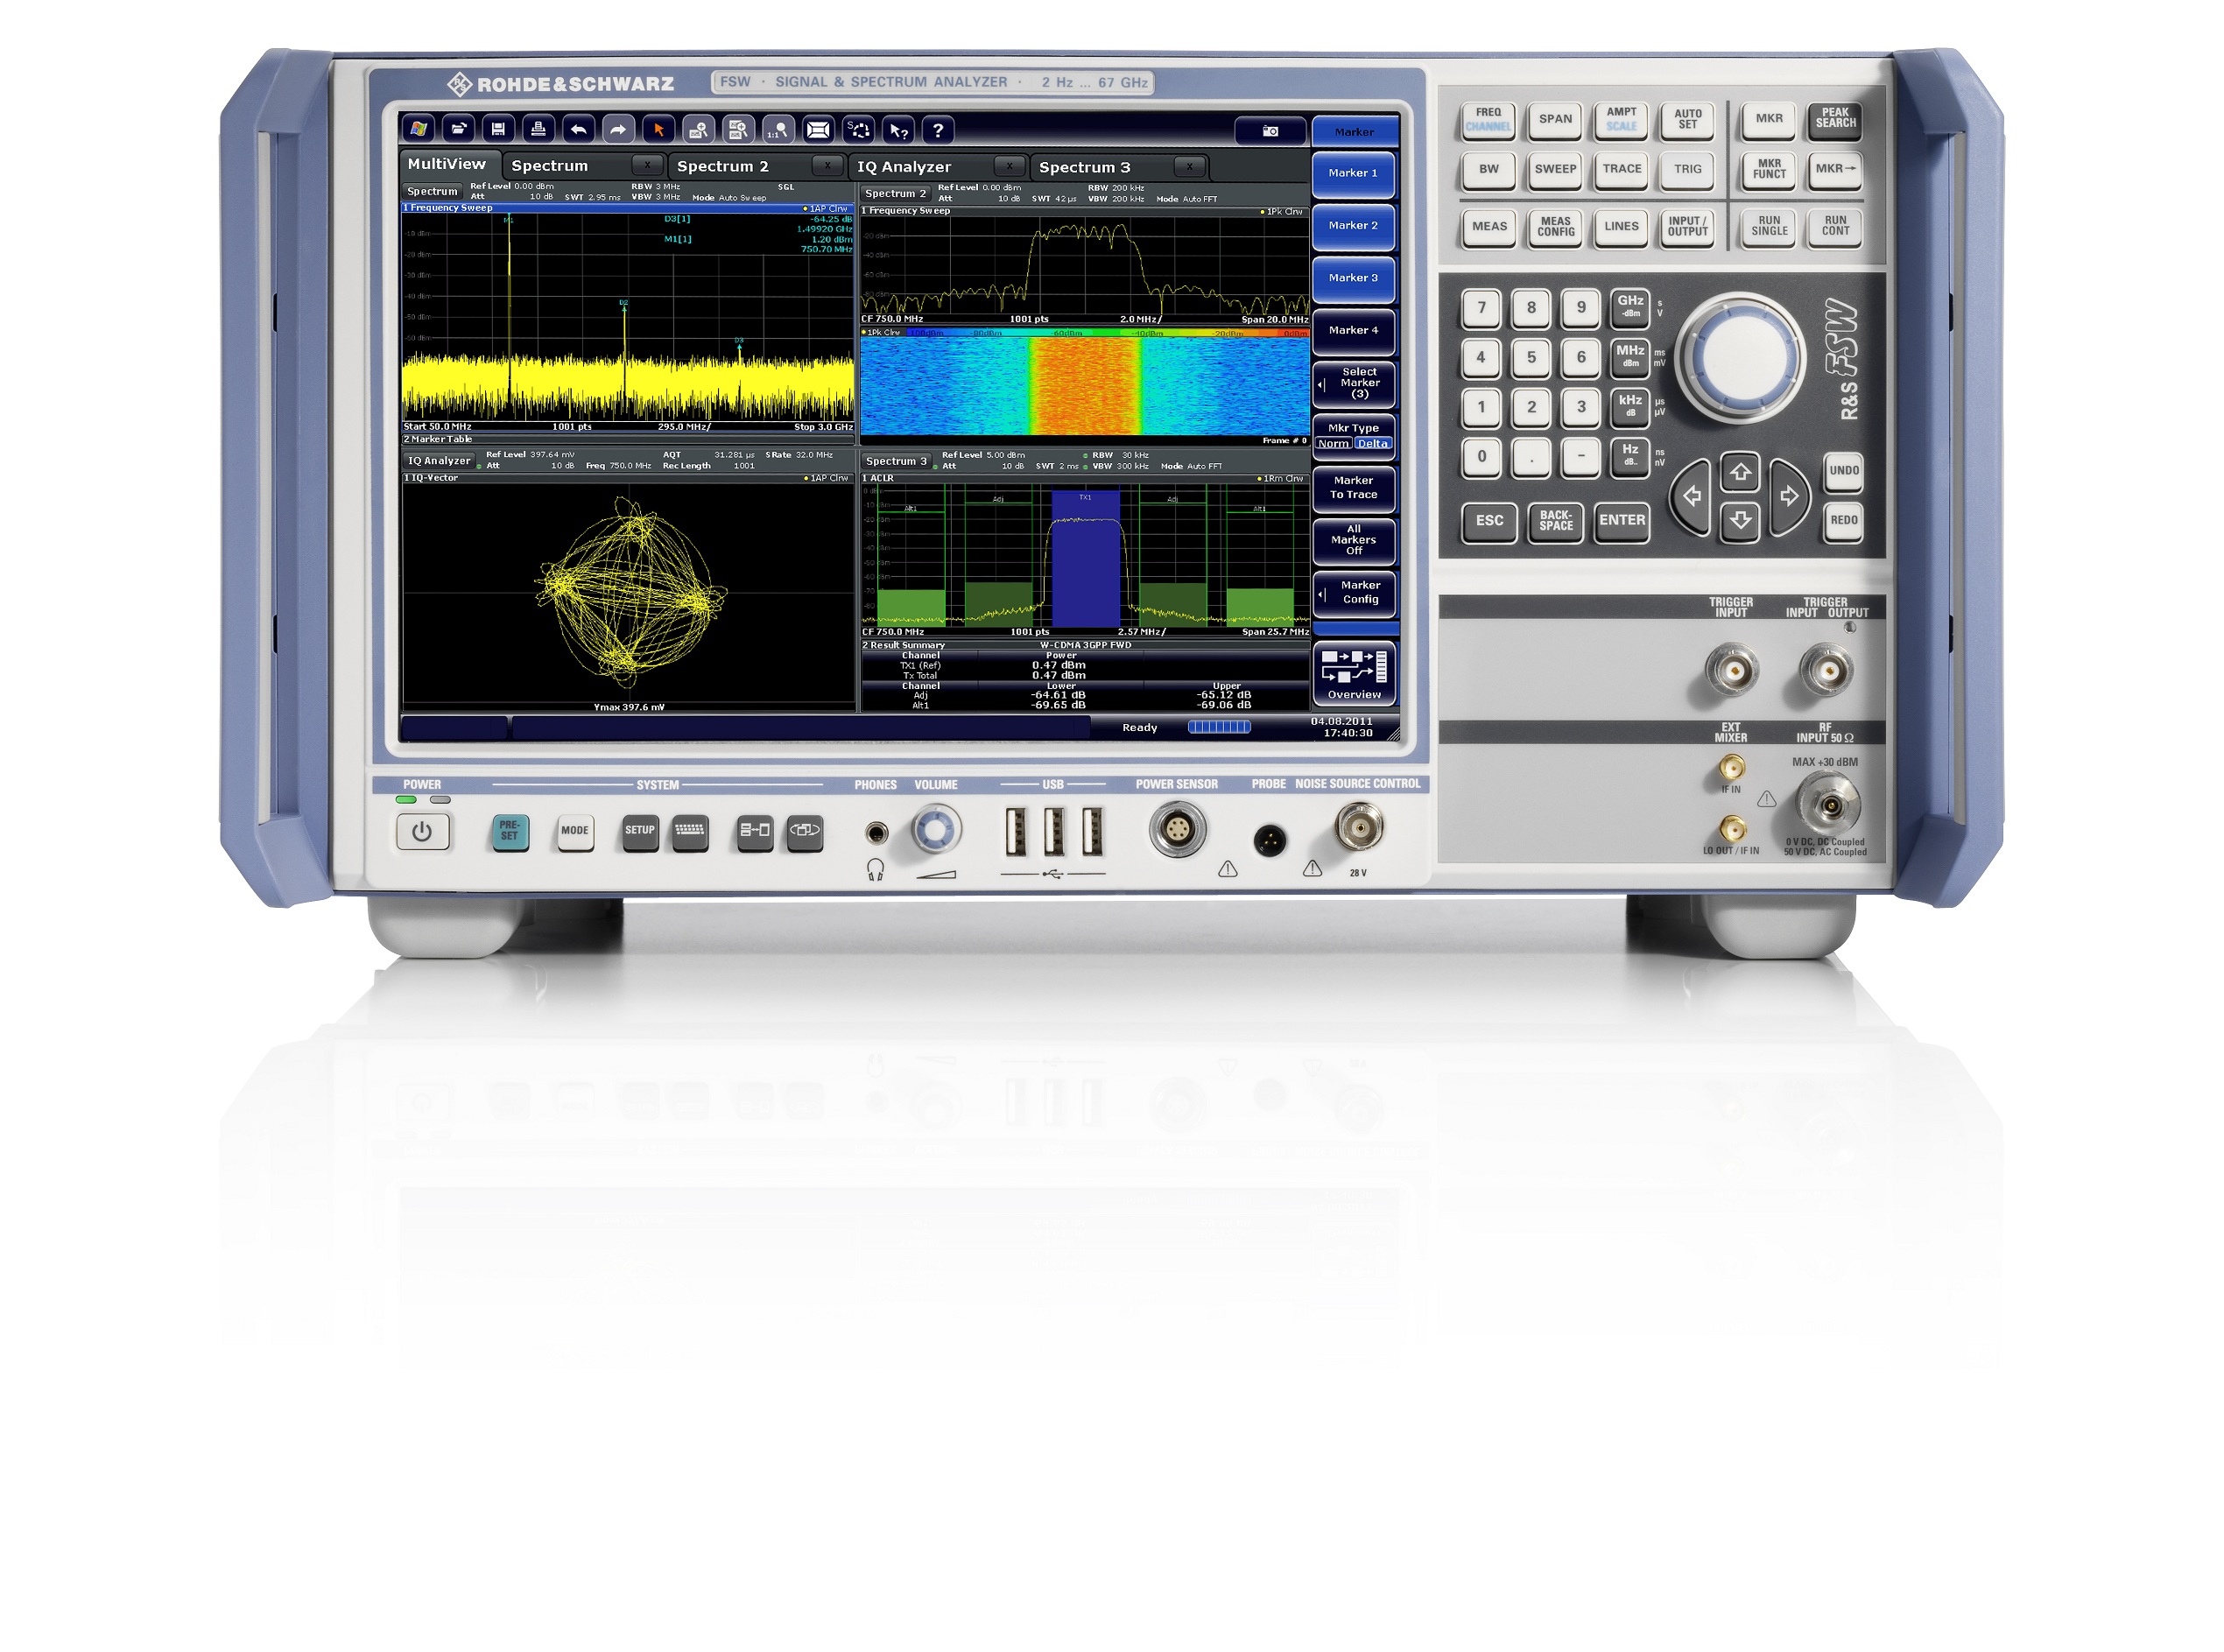 Figure 5: Rohde & Schwarz announced several new capabilities for its FSW signal and spectrum analyser, including a new range up to 67GHz and real-time measurement